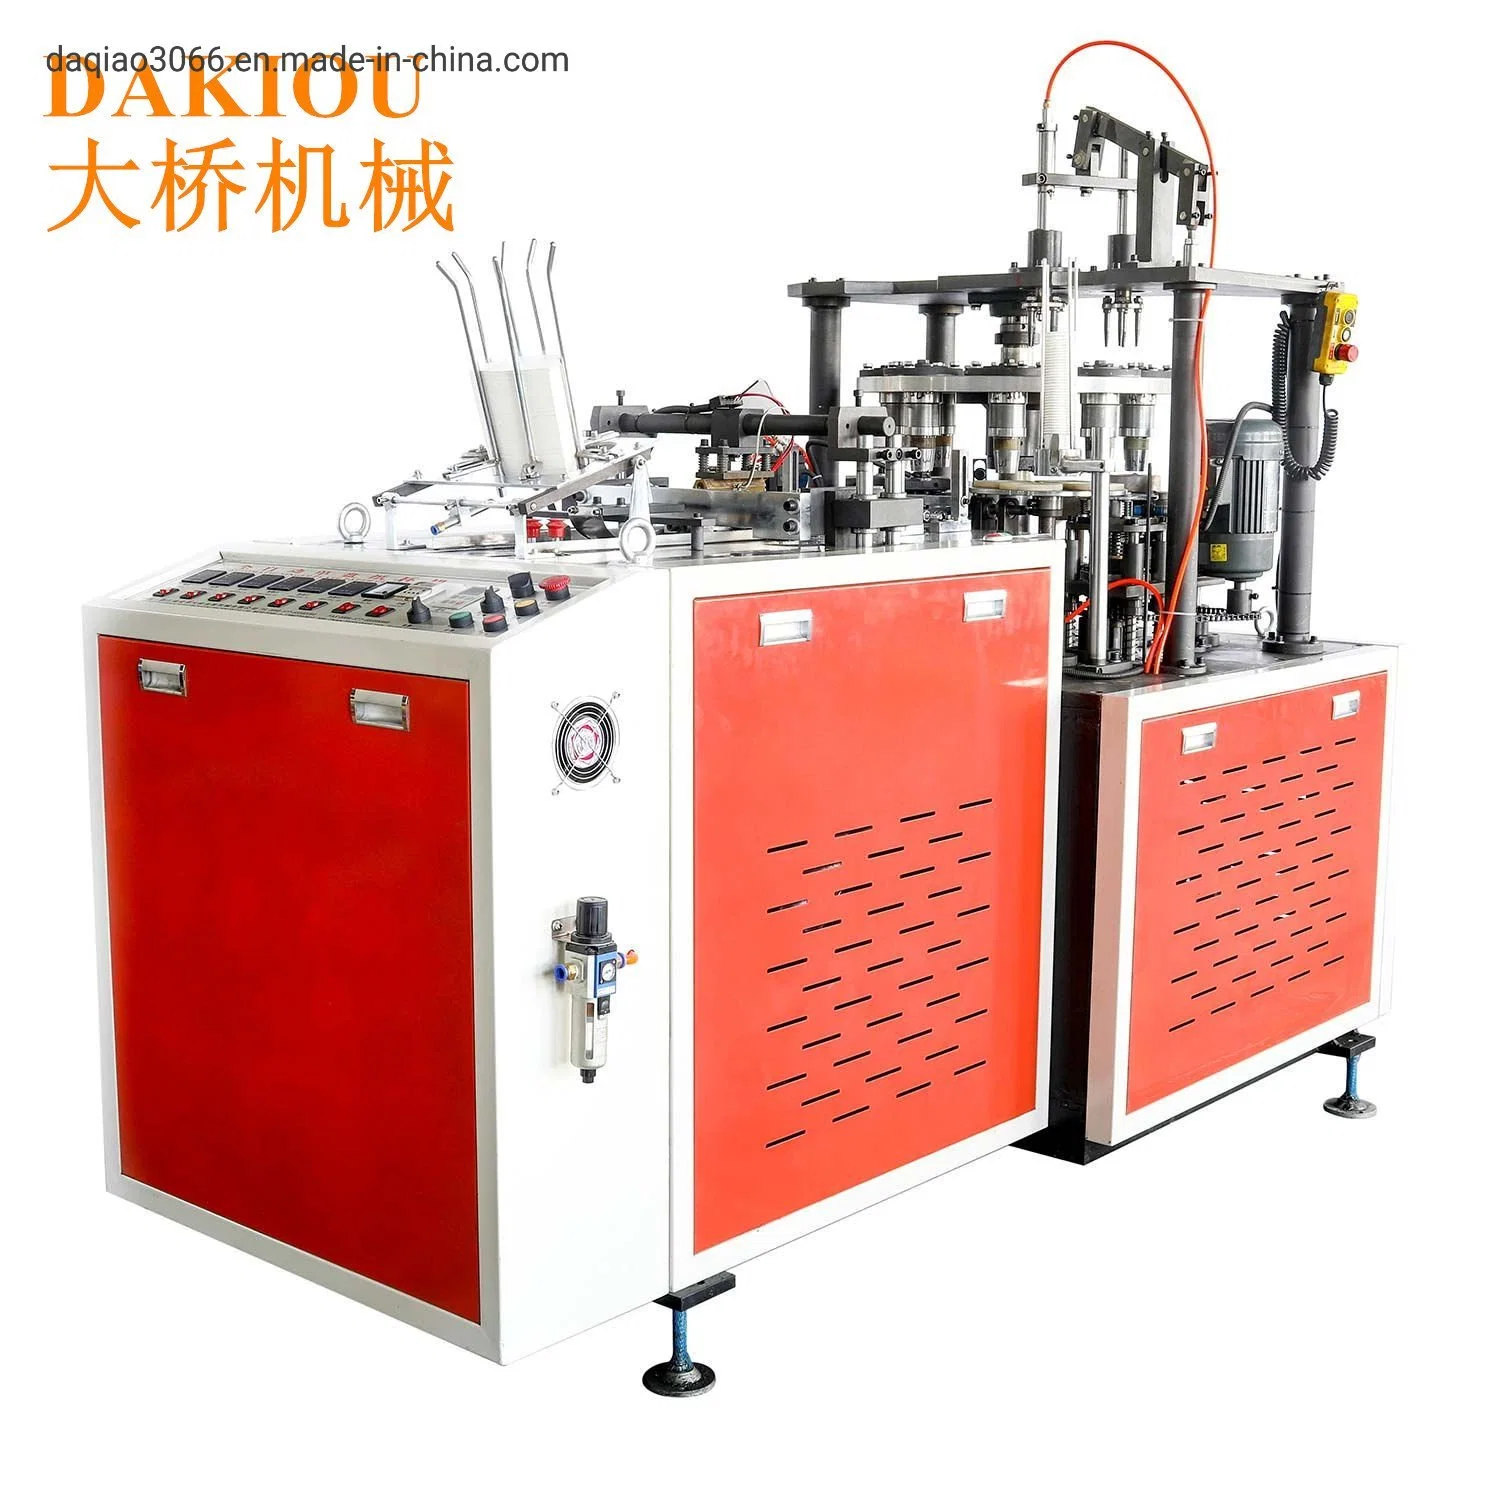 China Supplier Cheap Paper Cup Machine to Make Disposable Paper Cup